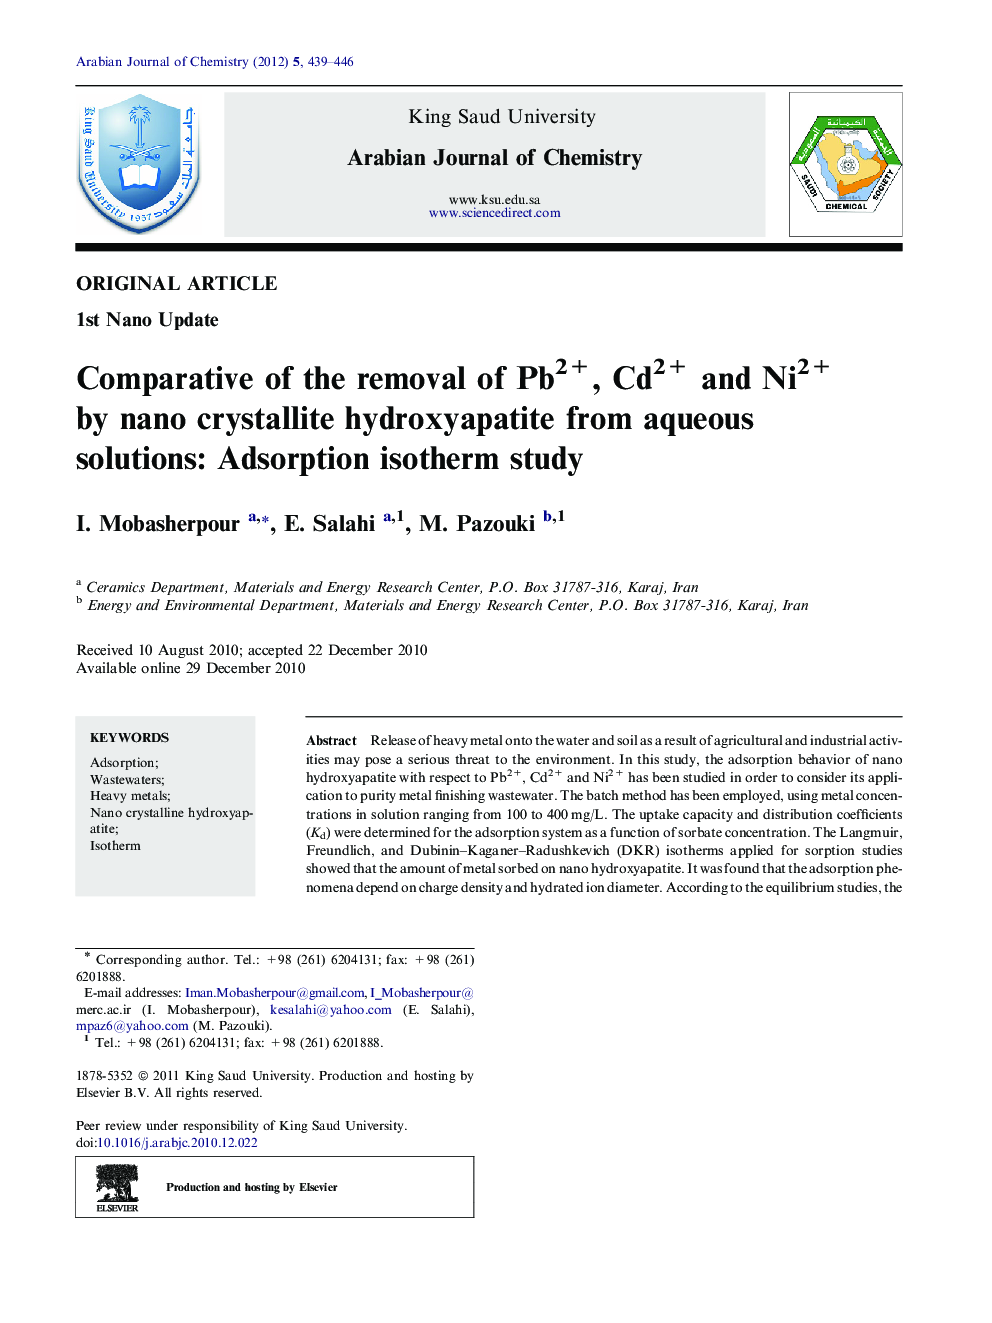 Comparative of the removal of Pb2+, Cd2+ and Ni2+ by nano crystallite hydroxyapatite from aqueous solutions: Adsorption isotherm study 